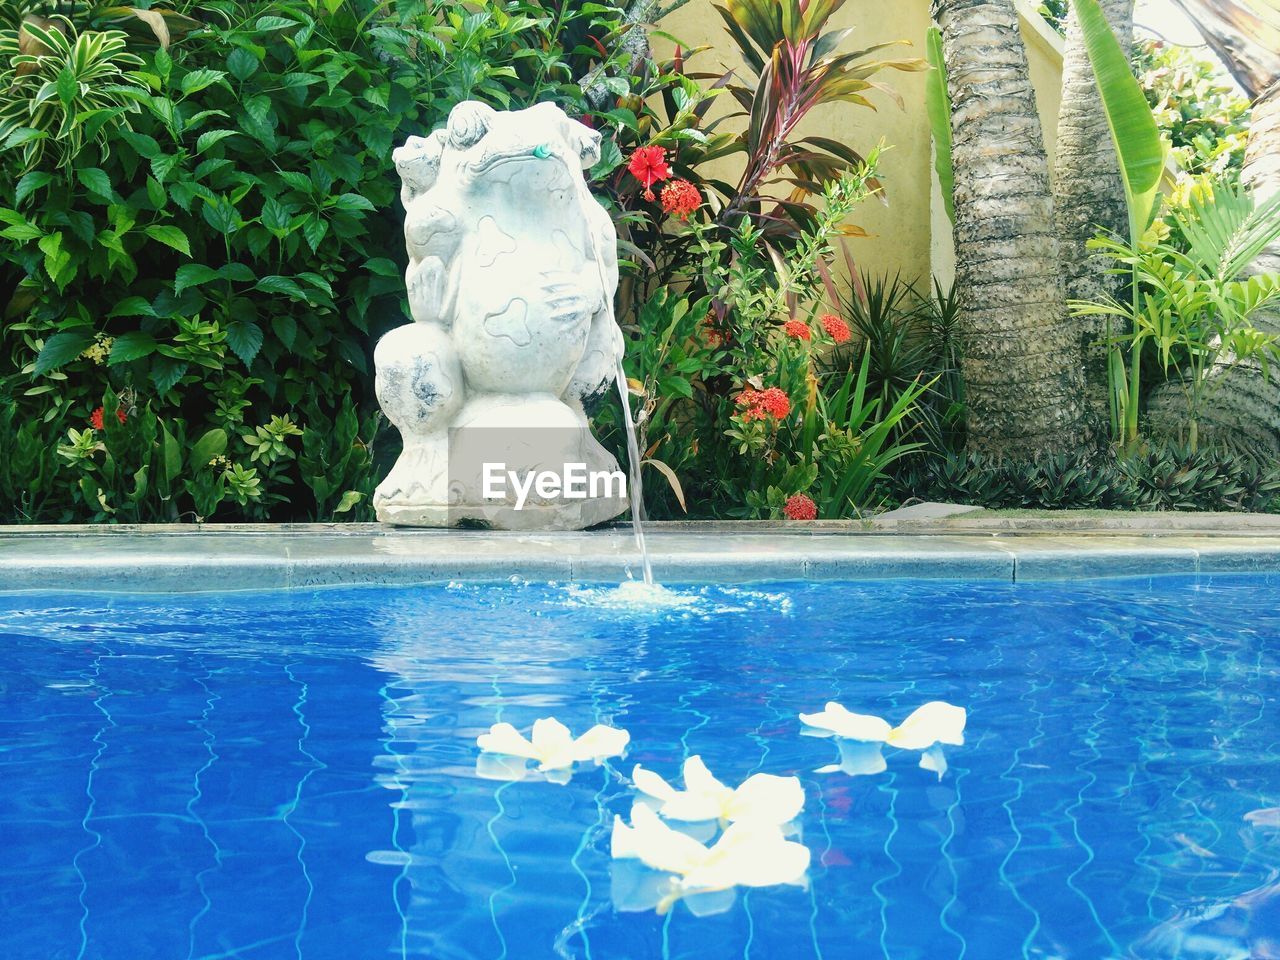 Frog sculpture pouring water in pool with white flower petals